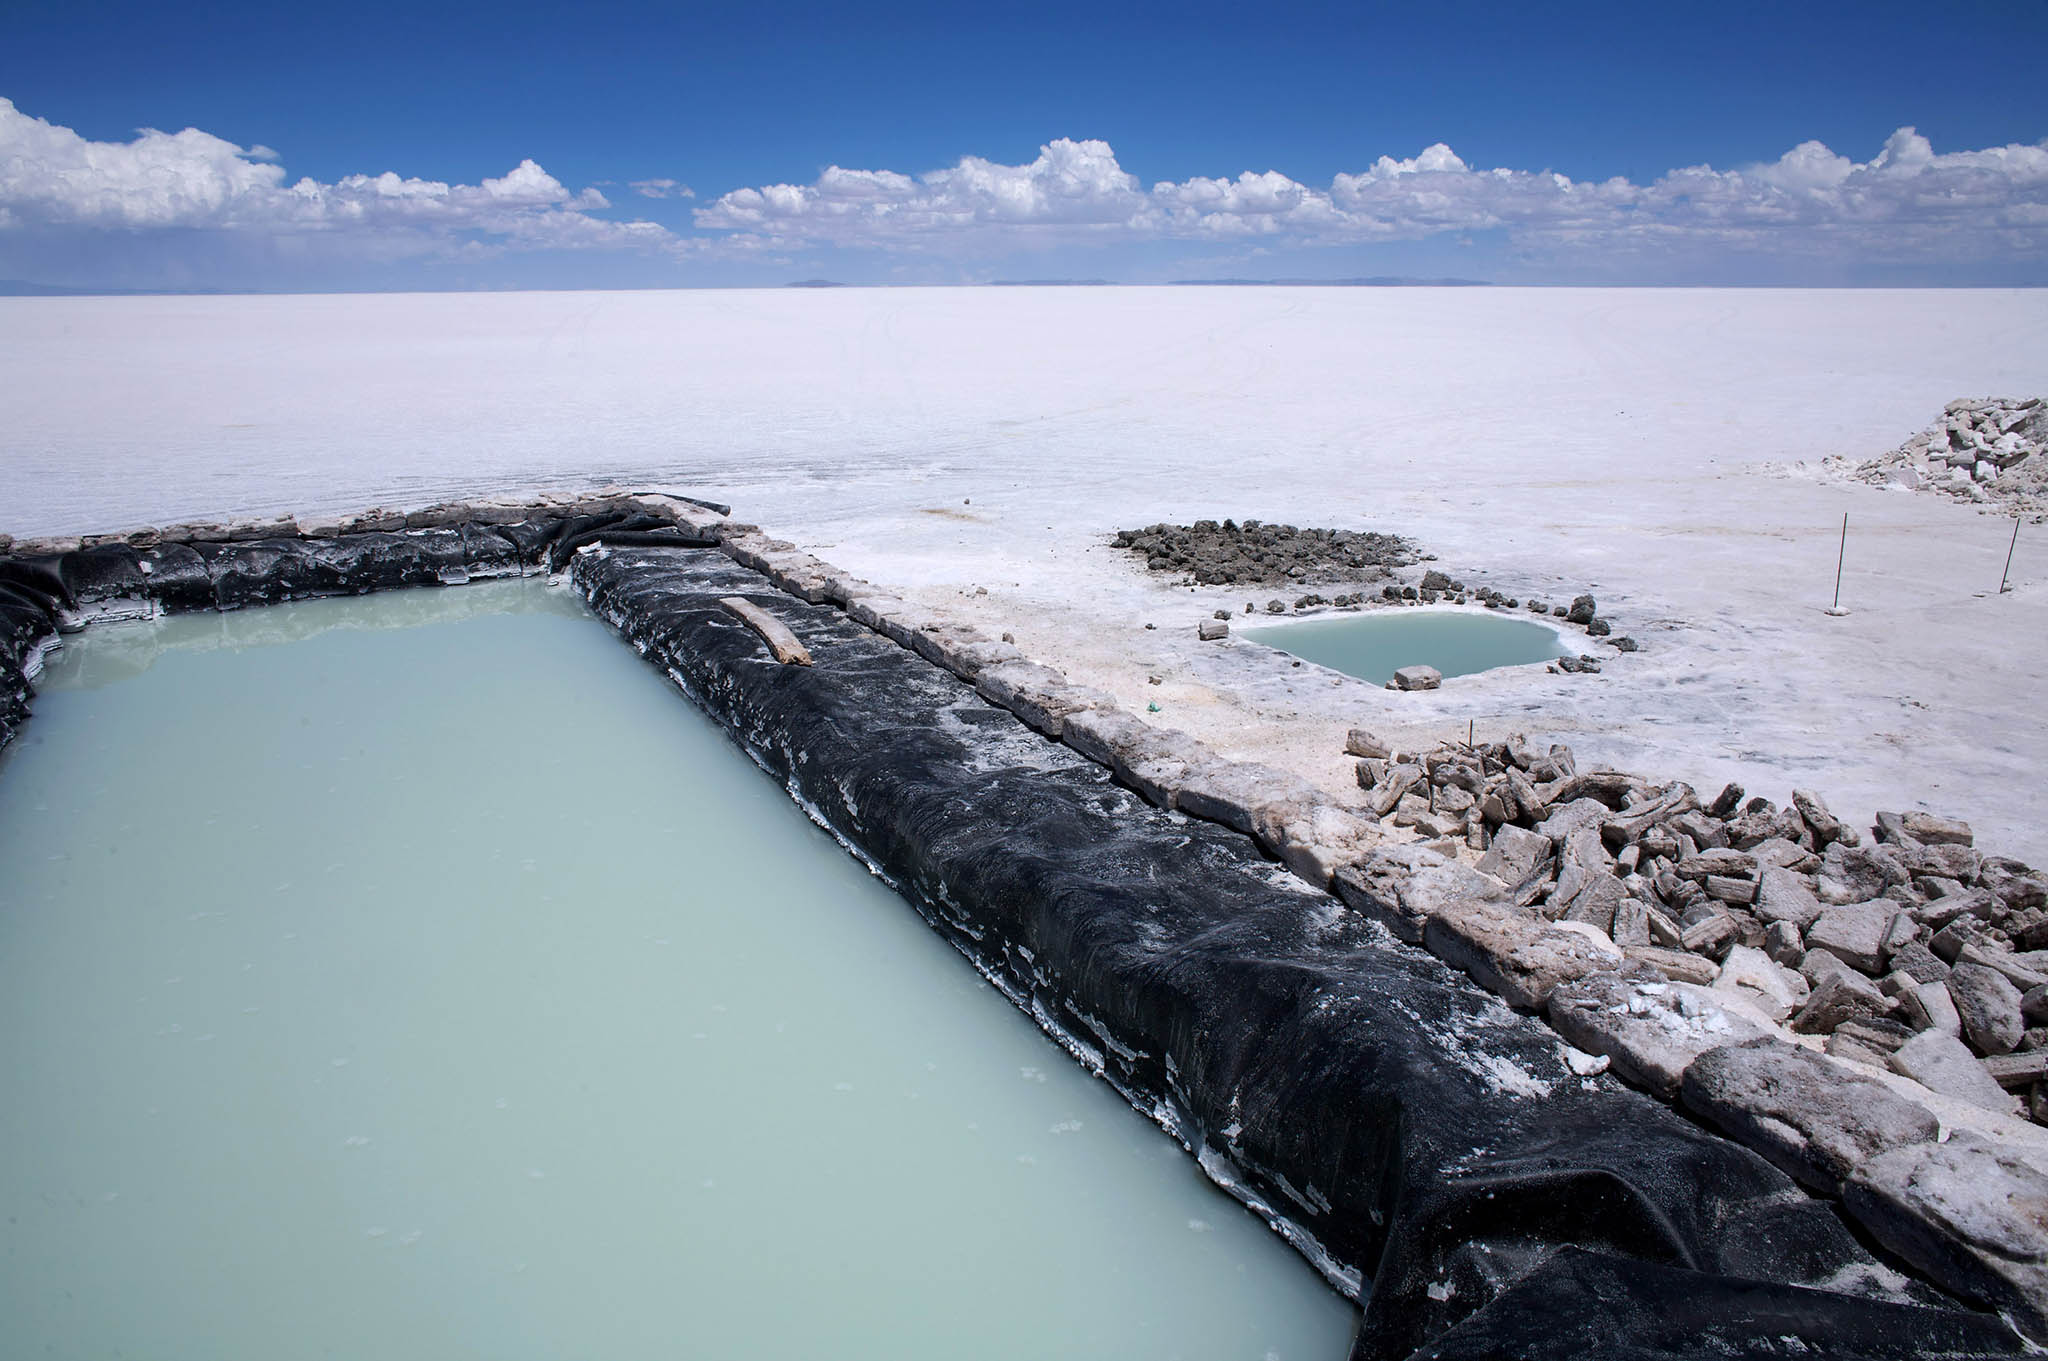 Pools of water are testing grounds for extracting lithium at the Salar de Uyuni (the Uyuni Salt Flats) in Bolivia. Current extraction methods require substantial amounts of water. February 2, 2009. (Noah Friedman-Rudovsky/The New York Times)